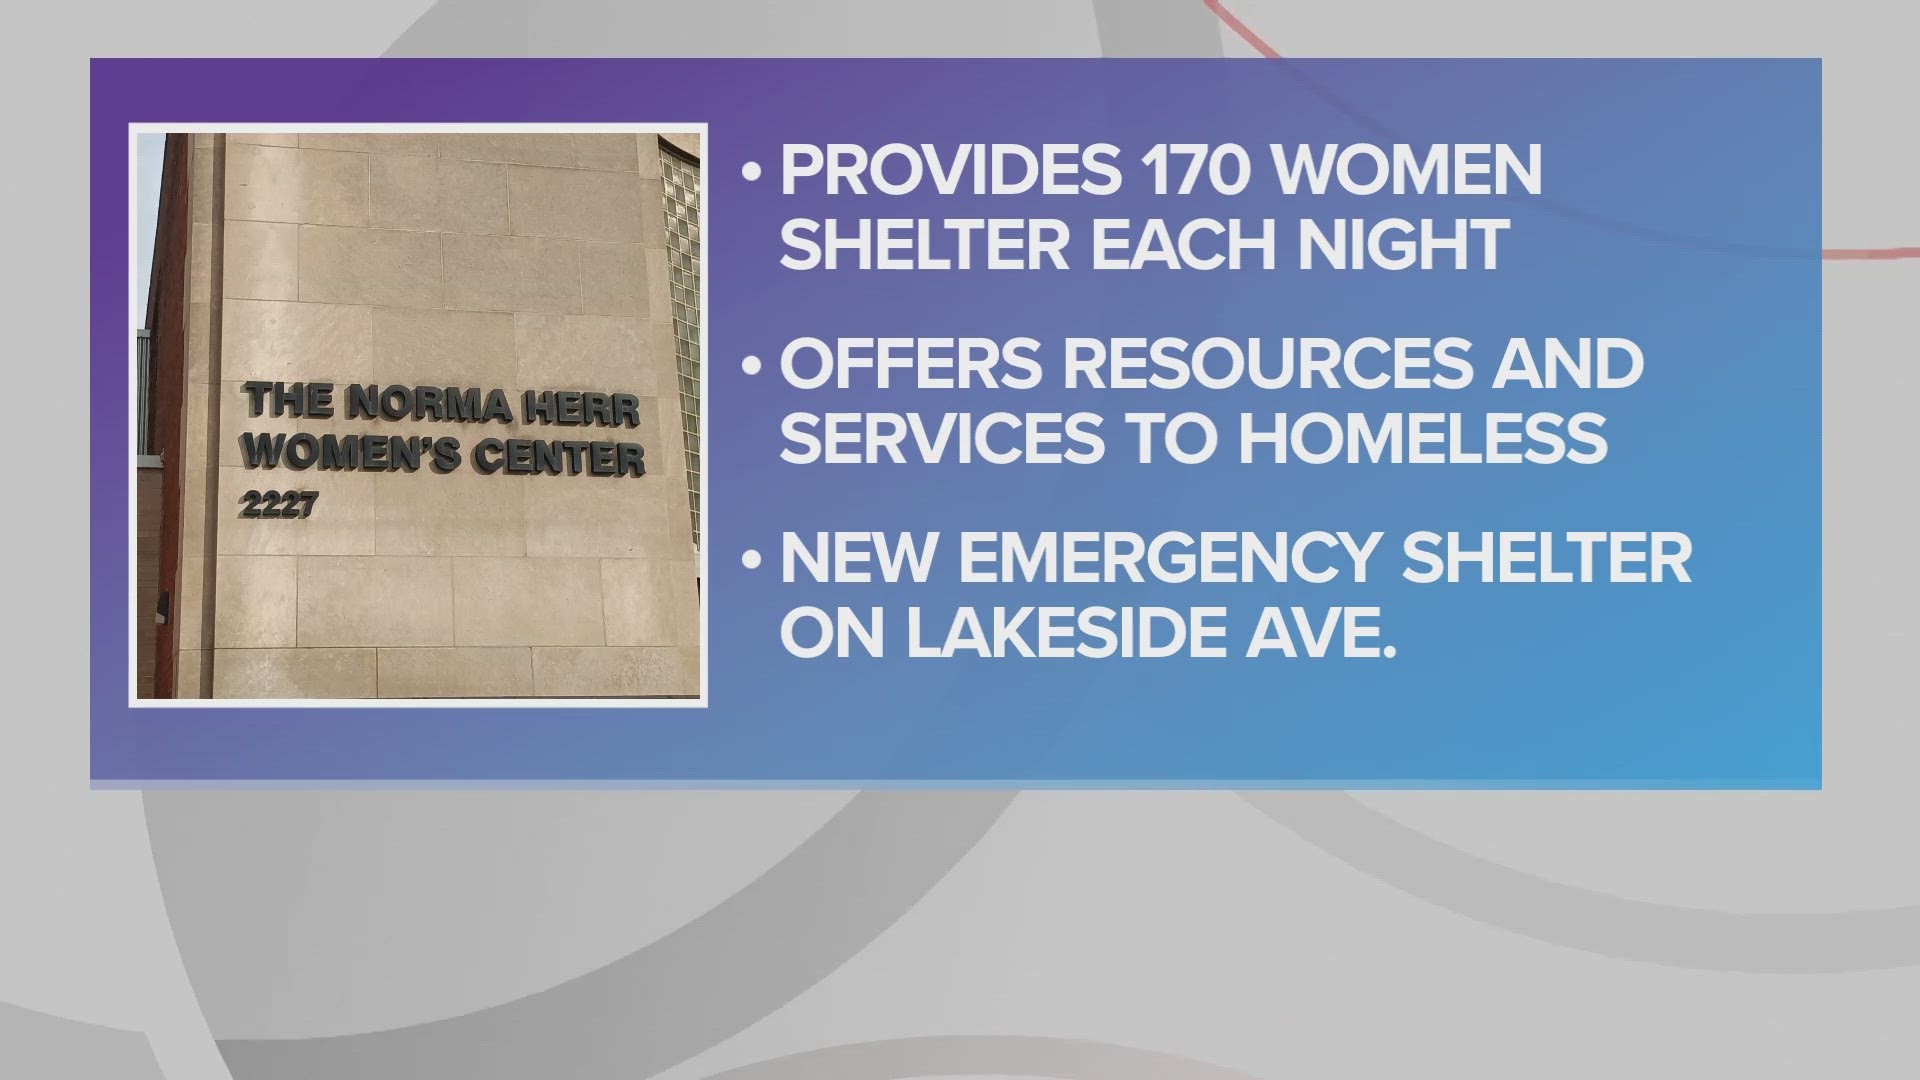 Cuyahoga County is giving almost $8 million in federal funds to improve the Norma Herr Women's Center, which provides shelter to an average of 170 women each night.